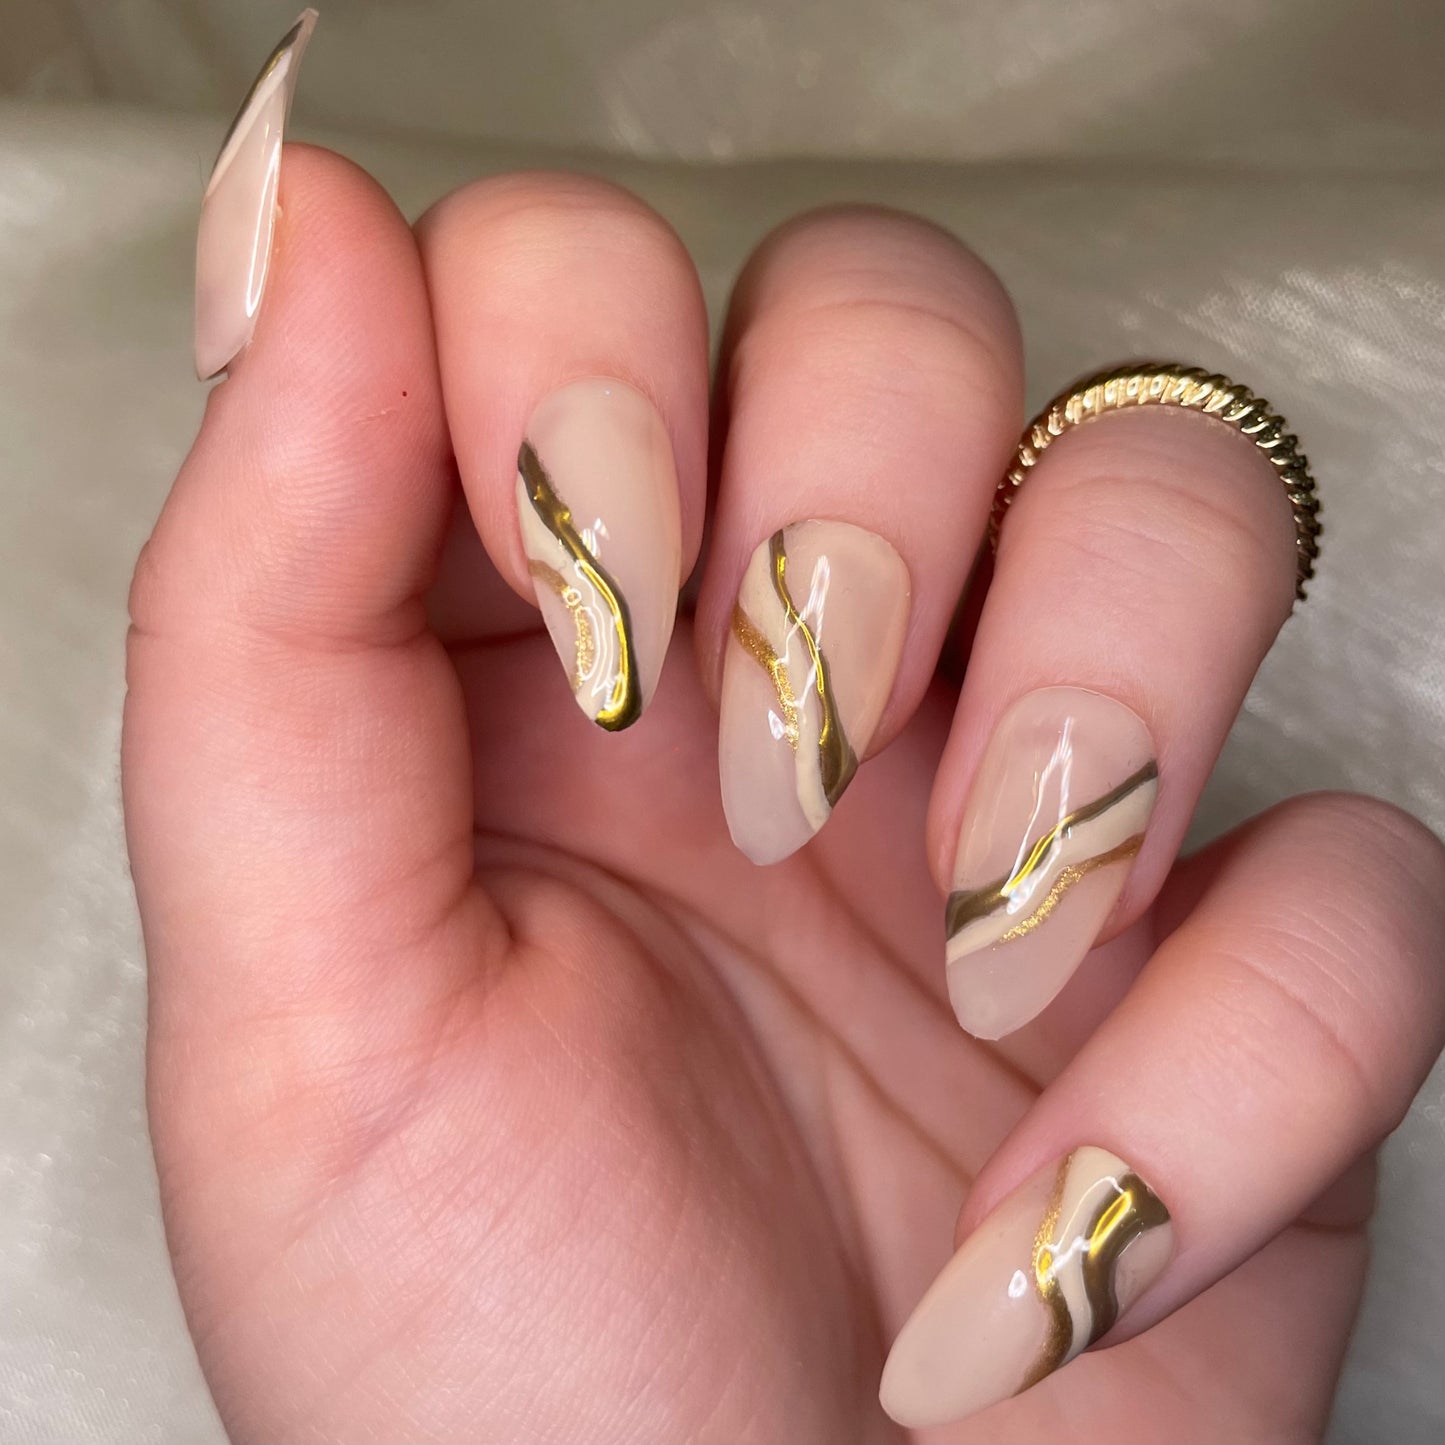 Sheer Nude and Gold Chrome Almonds